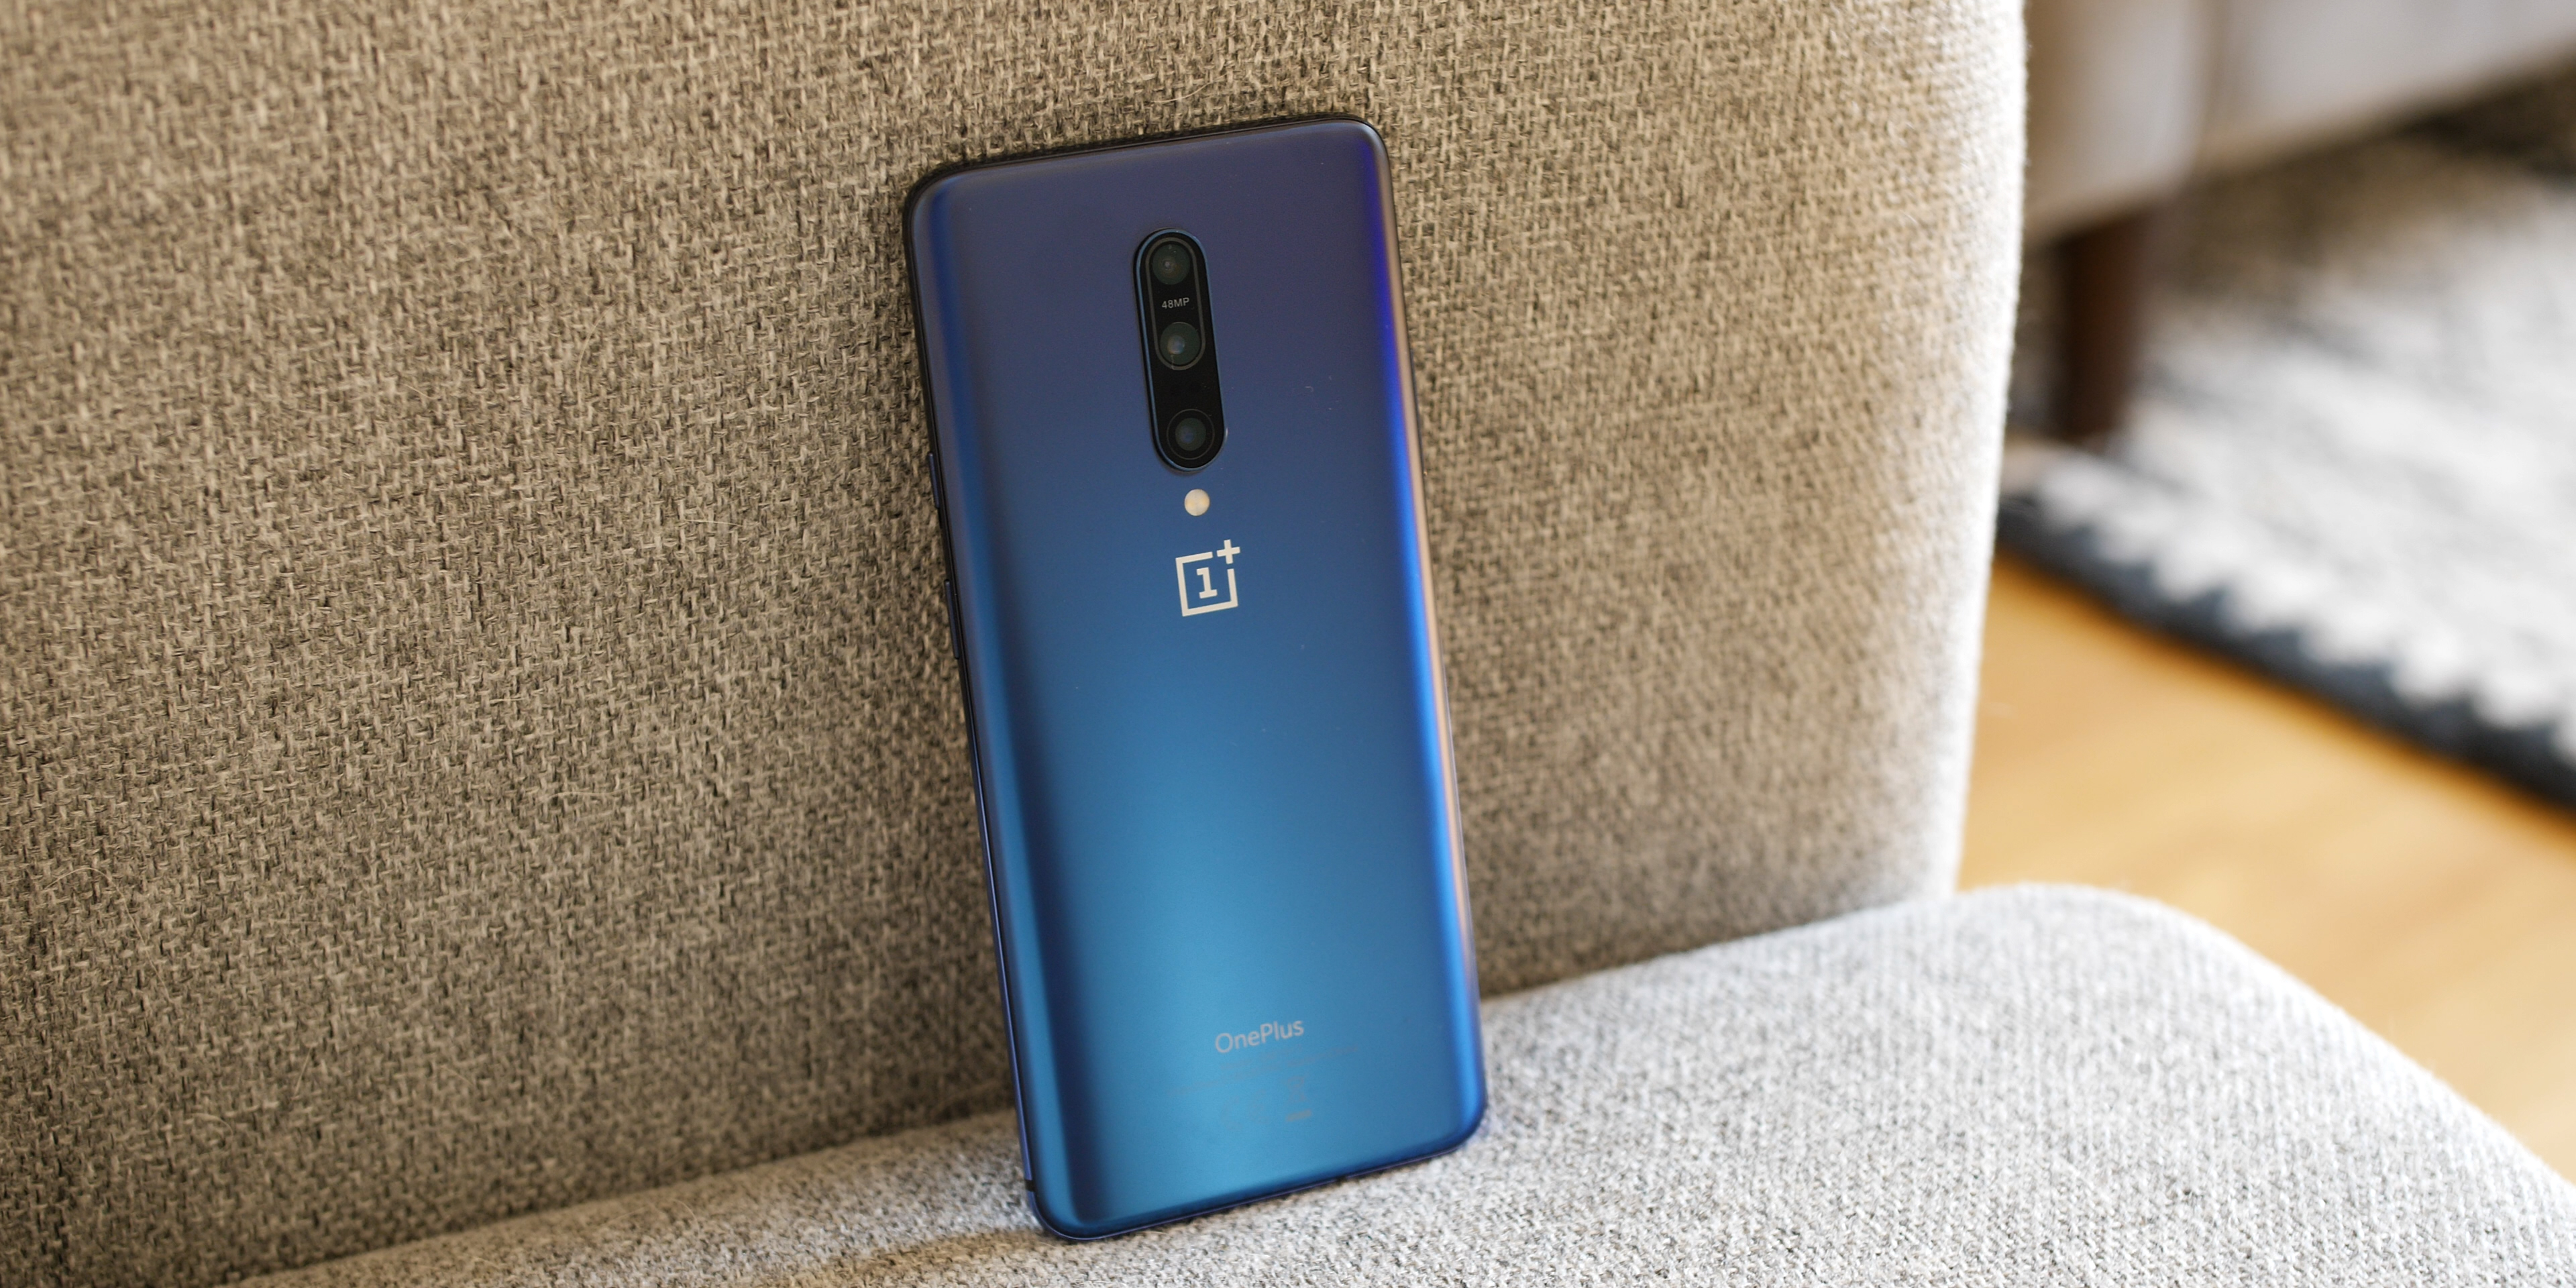 OnePlus 7 Pro hands-on